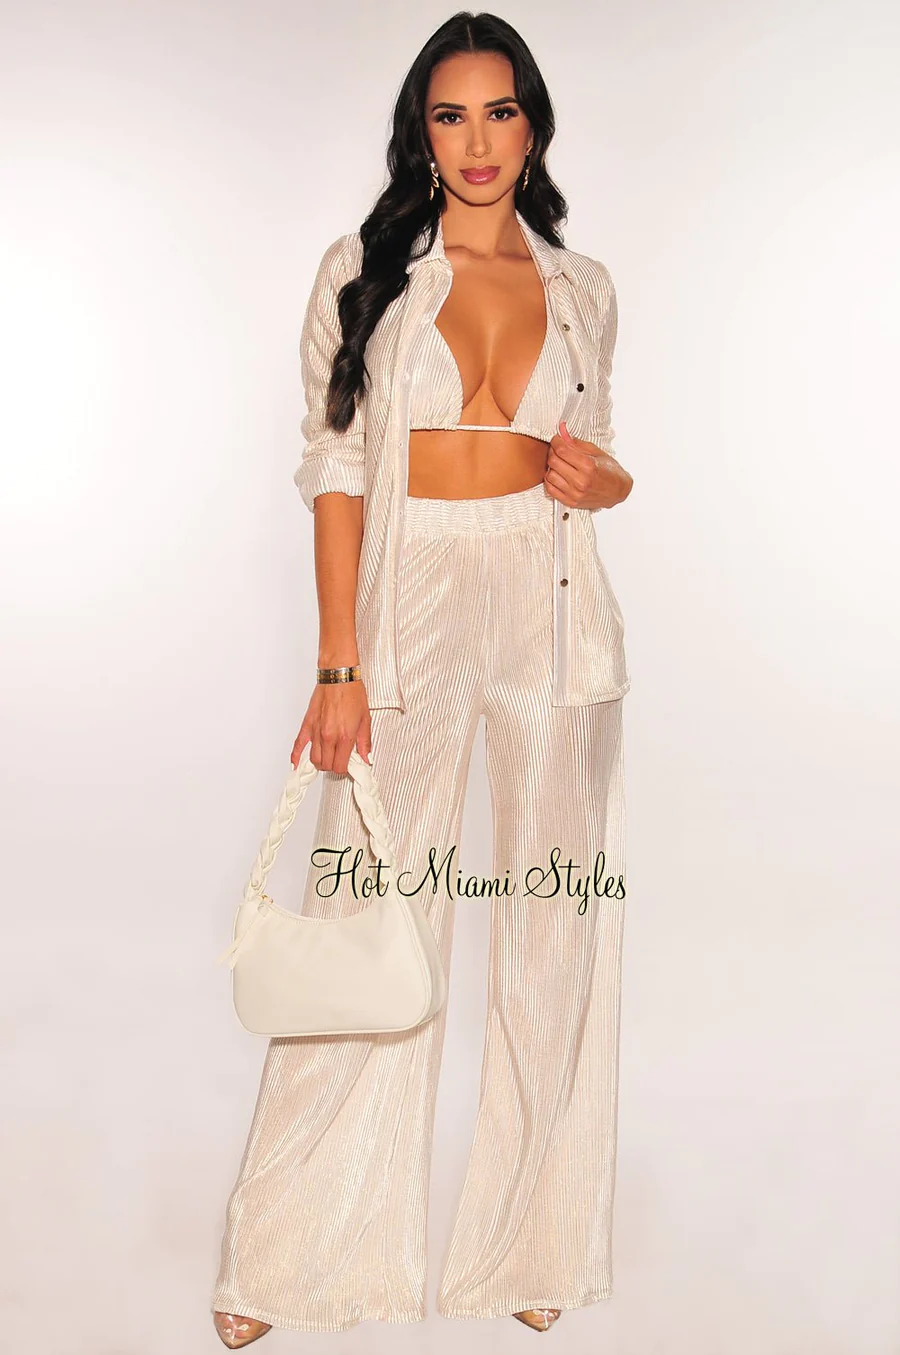 CHAMPAGNE SHIMMERY RIBBED HALTER TRIANGLE CUT TOP HIGH WAIST WIDE LEG PANTS LONG SLEEVES BUTTON DOWN THREE PIECE SET